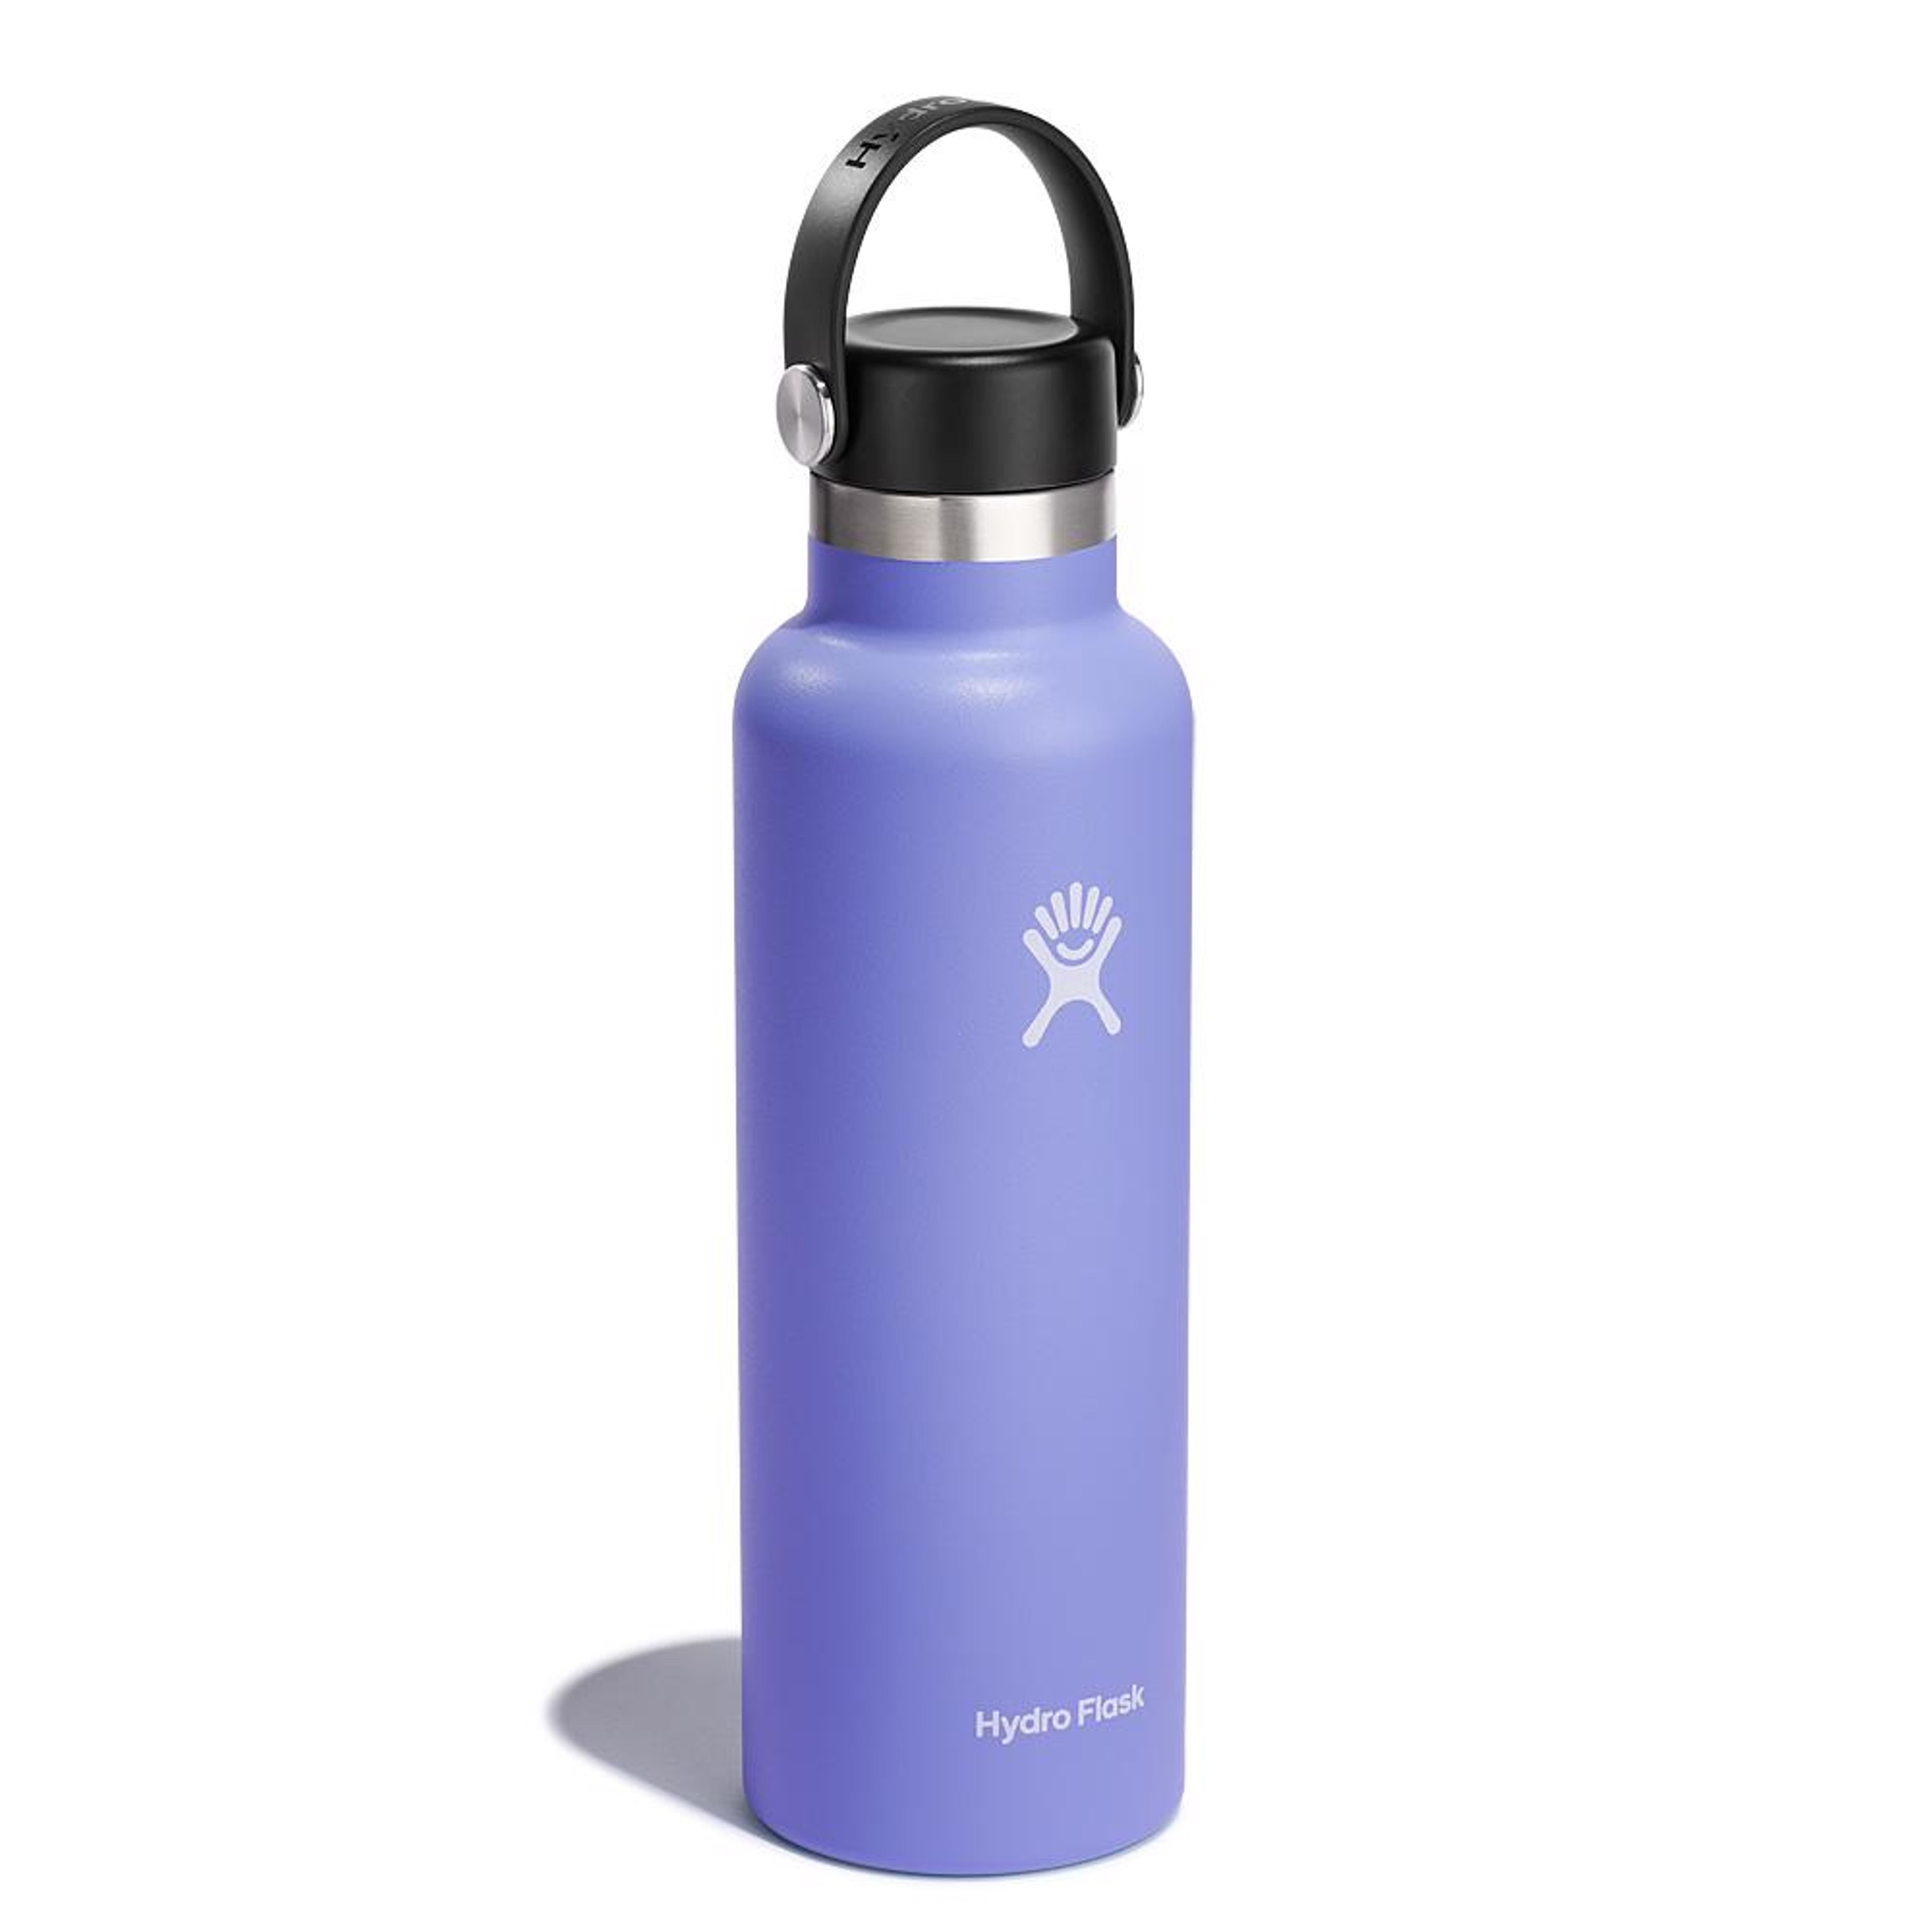 Hydro Flask Lupine 21 oz Standard Mouth Bottle with Flex Cap